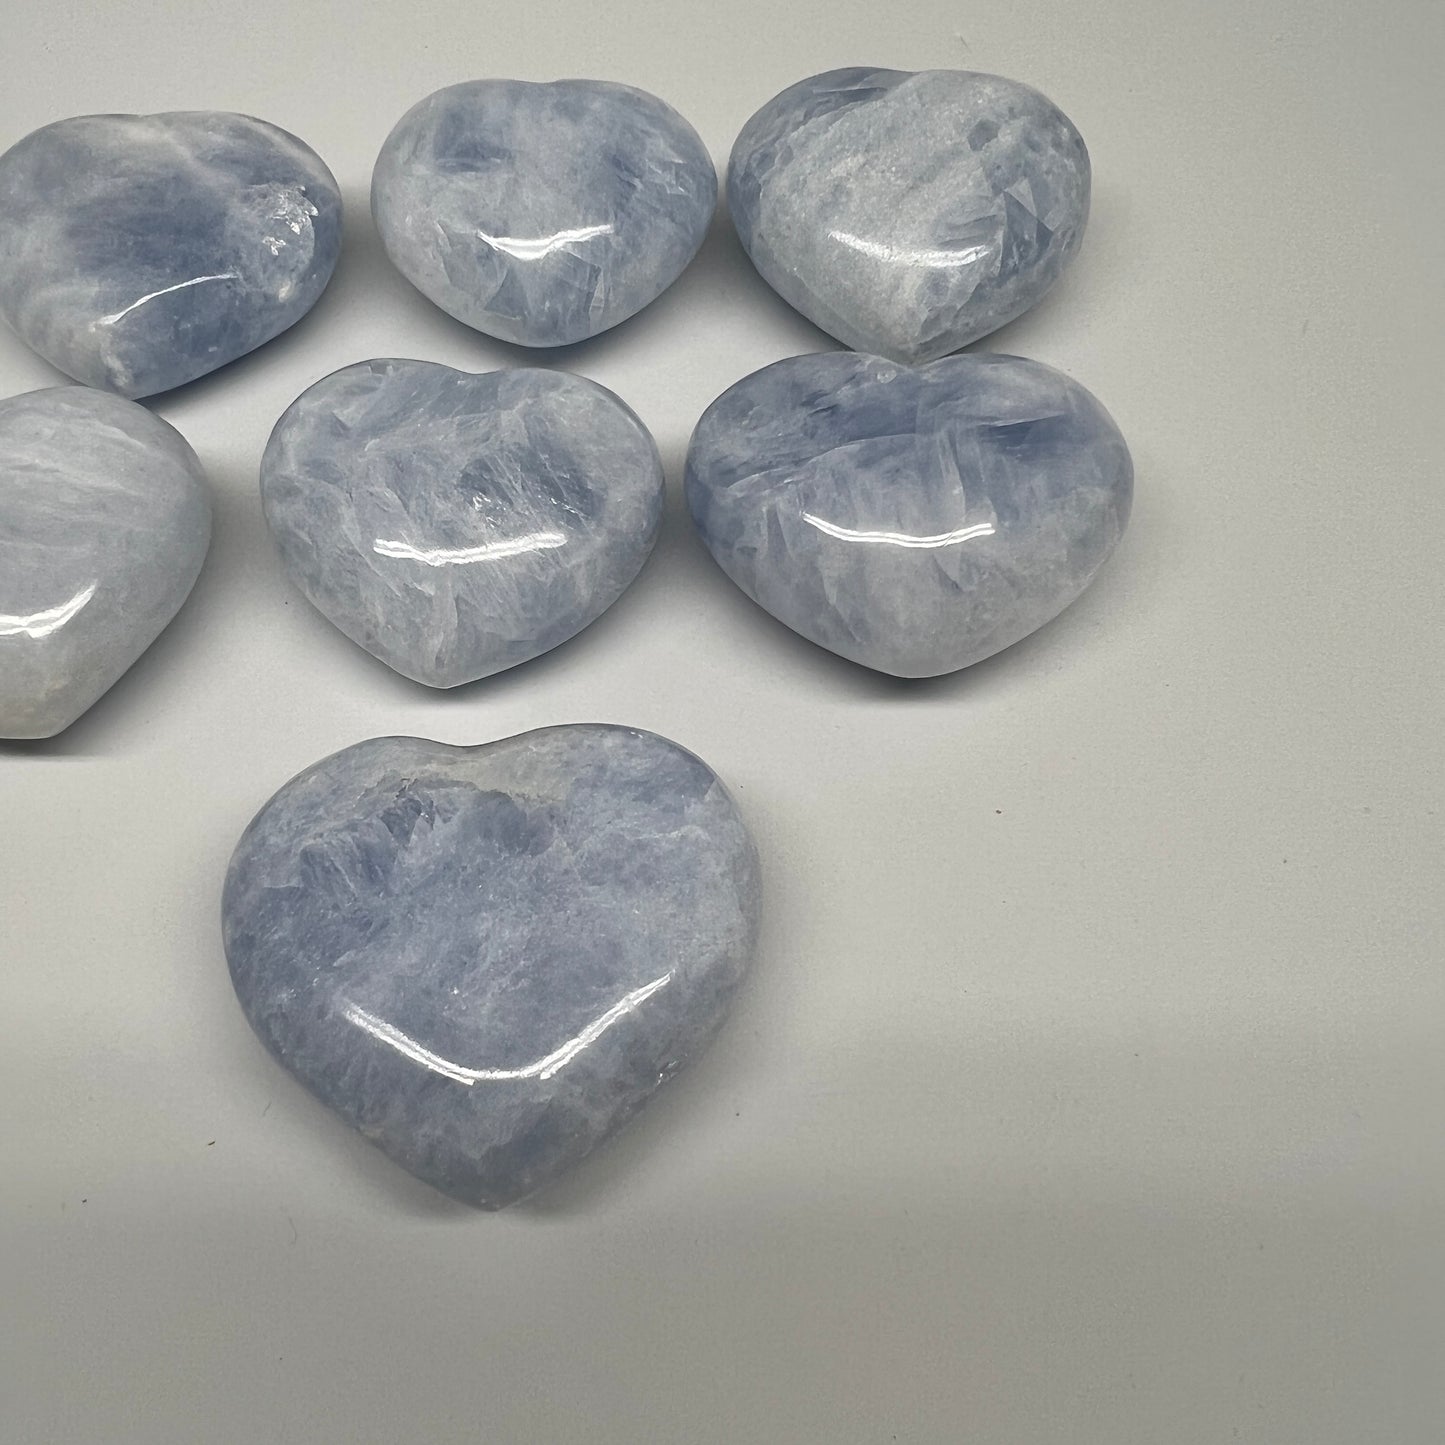 1010g (2.2 lbs) , 7 pcs, 2"- 2.3", Blue Calcite Hearts from Madagascar, B20856